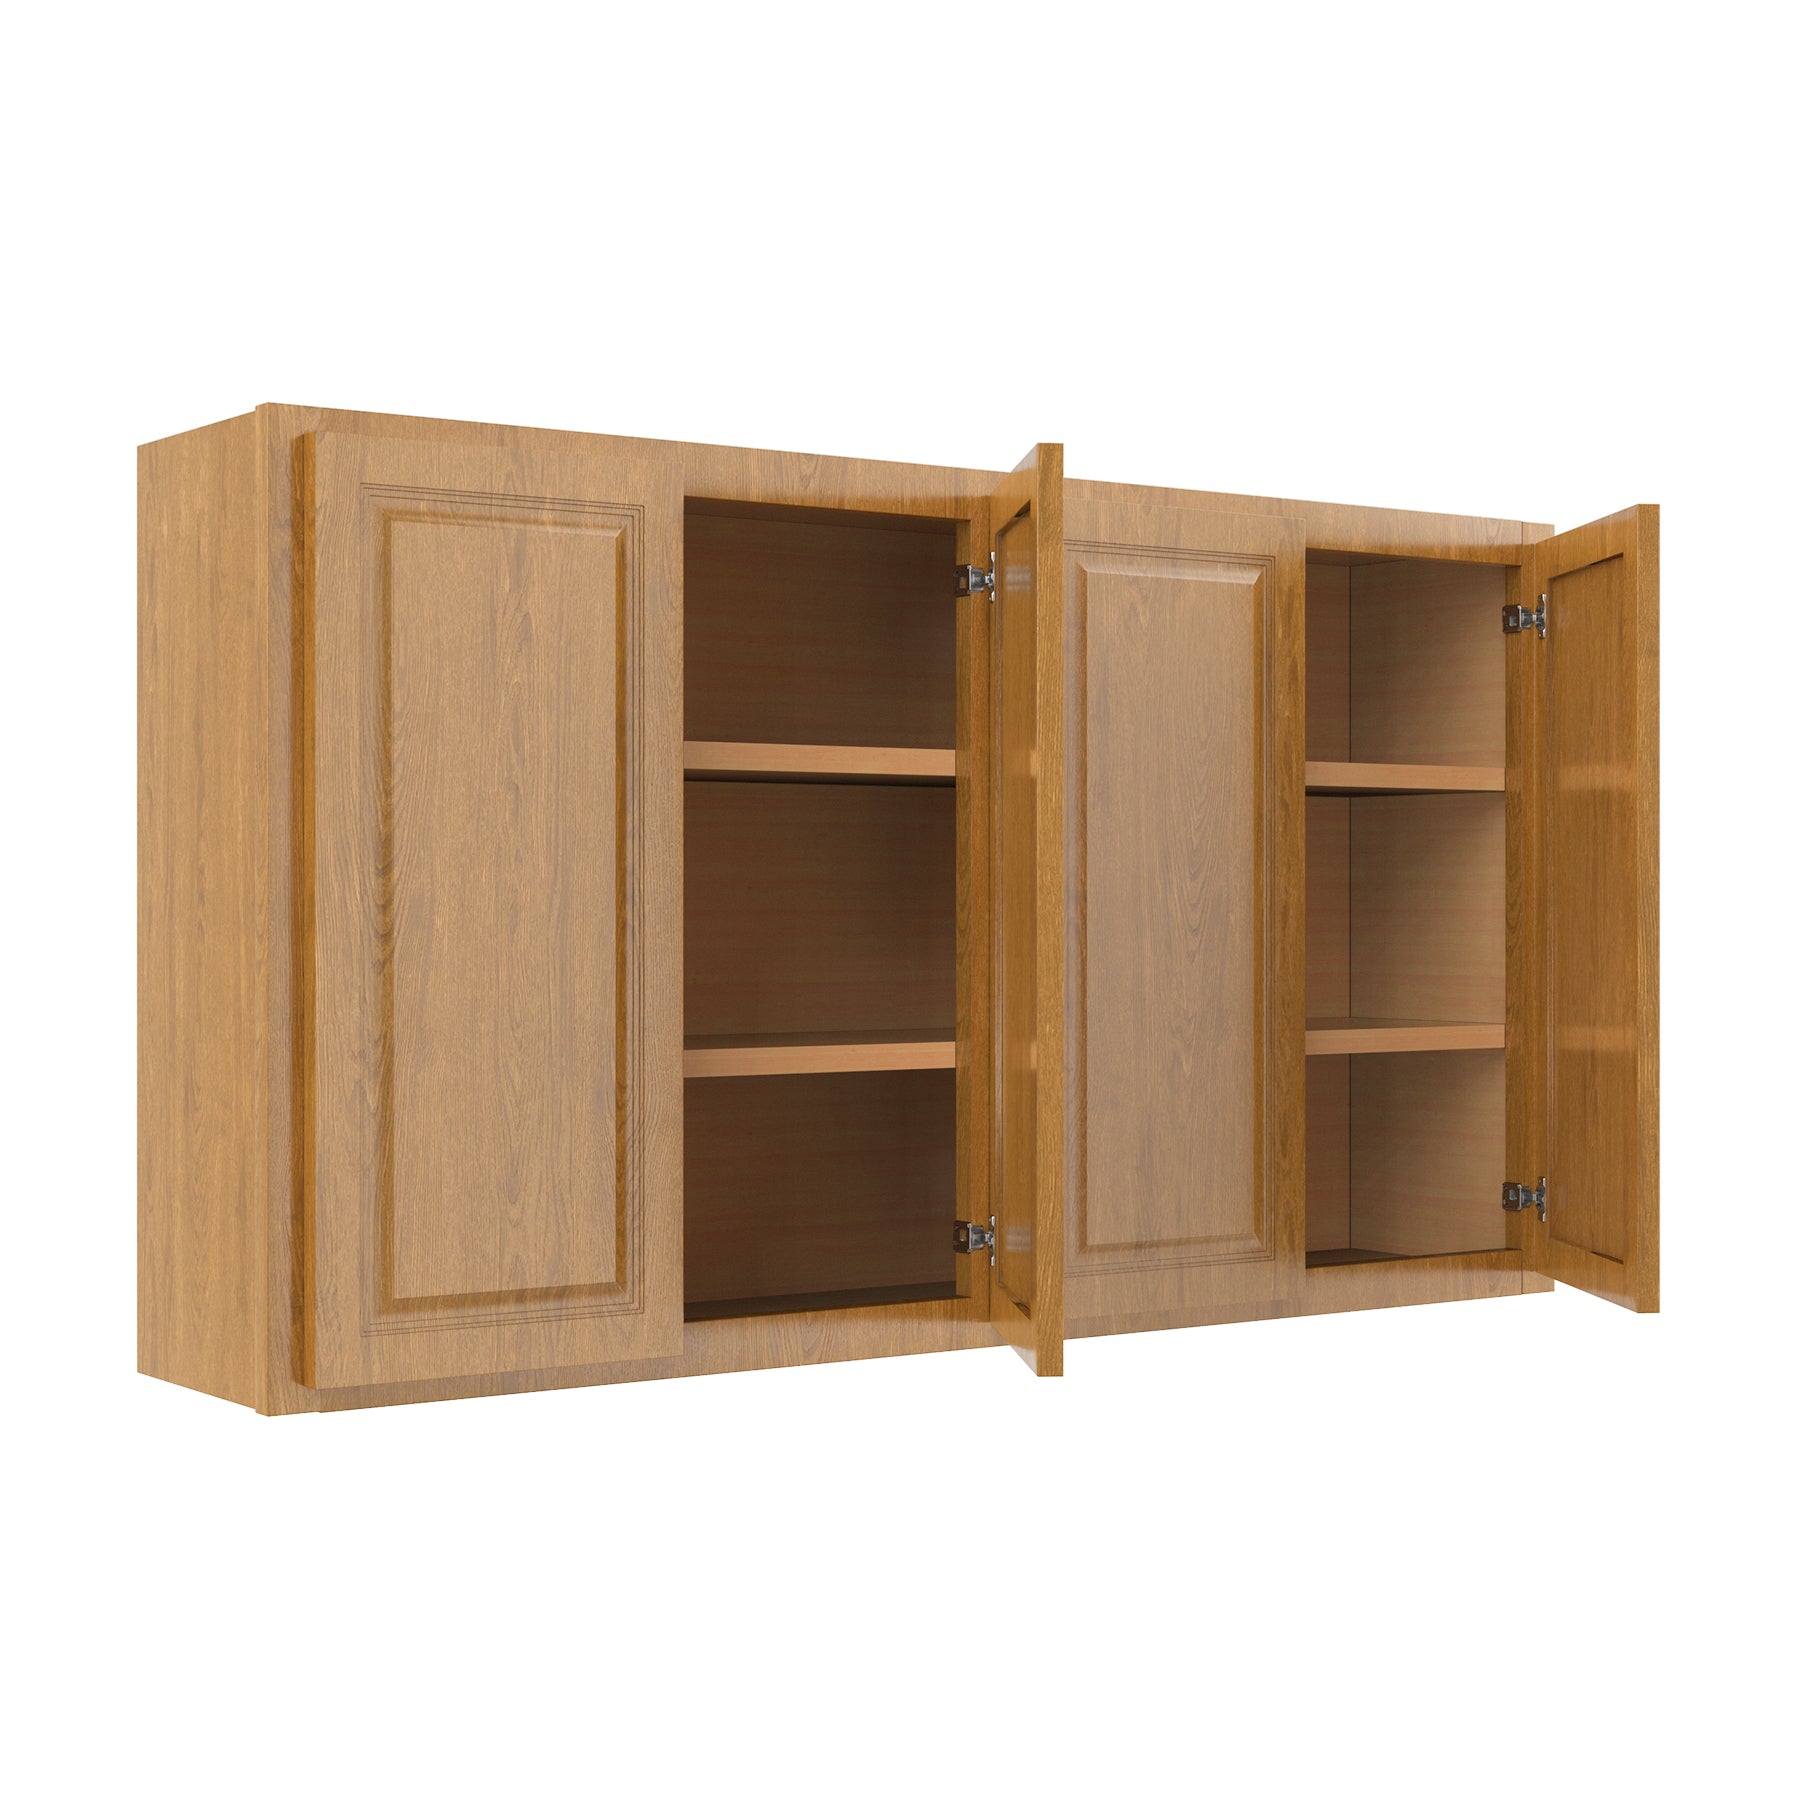 Country Oak 54"W x 30"H Wall Cabinet